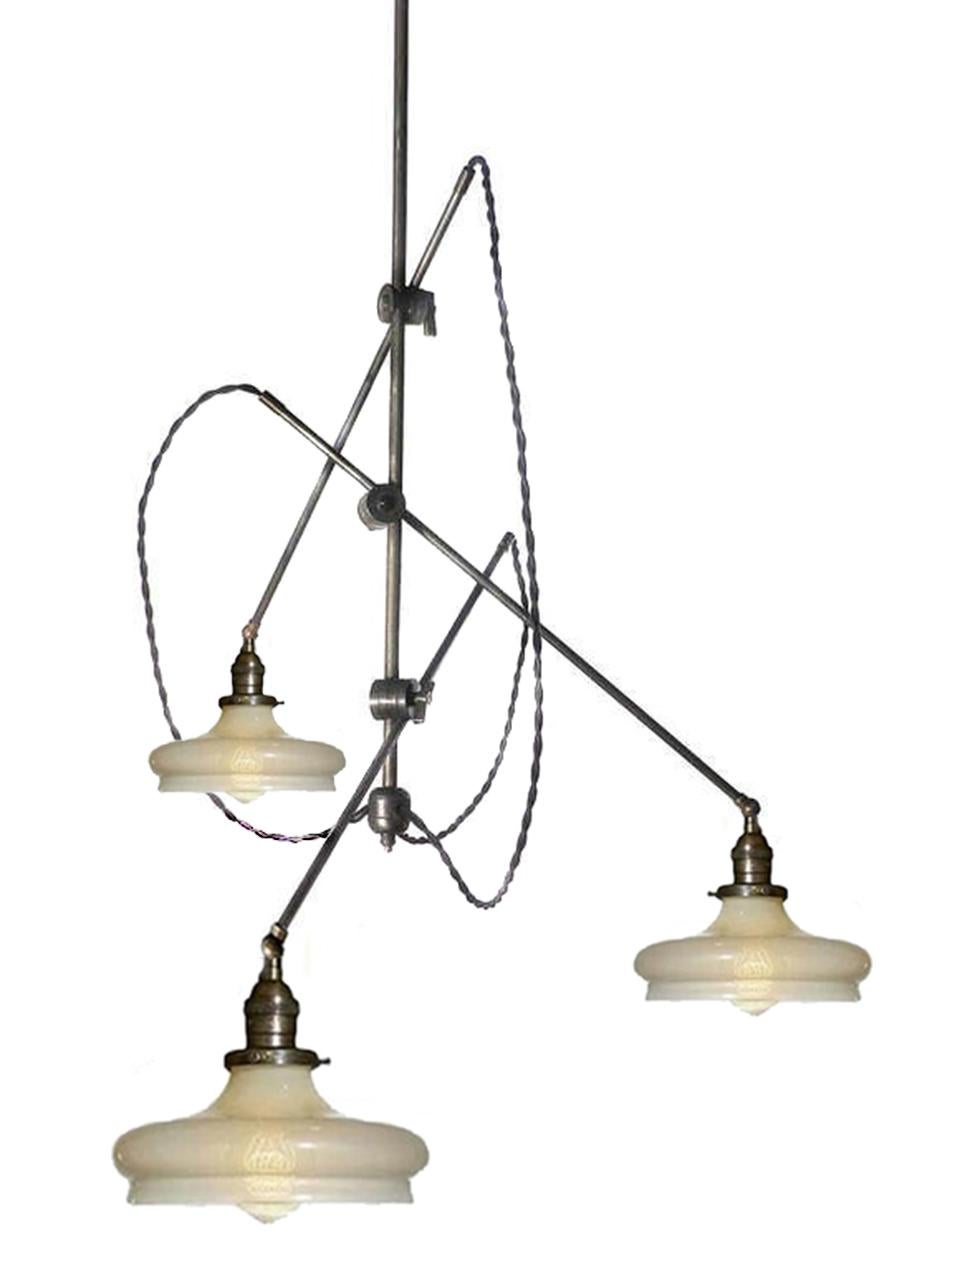 This perfectly sized articulated fixture features three matching Vaseline glass shades. The arms are all 36 inches long and the shades have 8.5 inch inch diameters. The vertical rod is 36 inches as well but can be longer if needed. The delicate